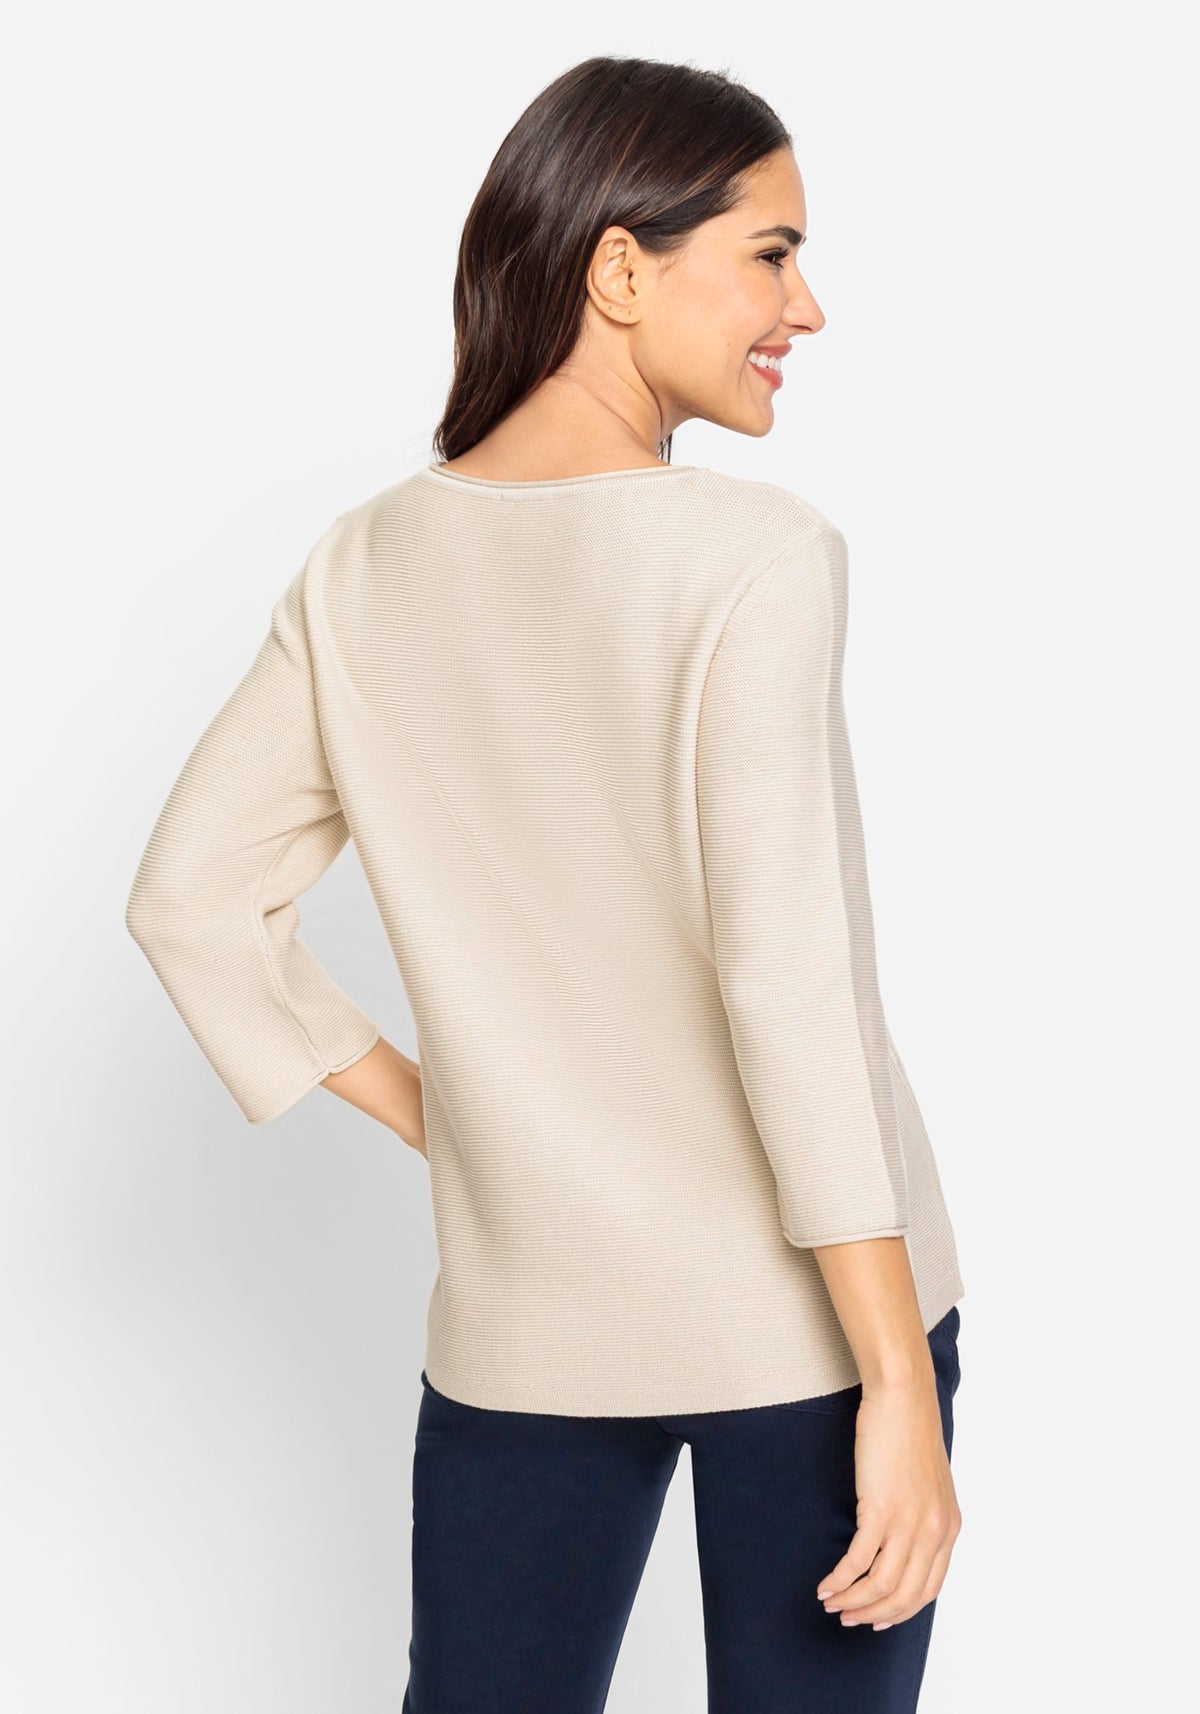 Cotton Blend 3/4 Sleeve Boat Neck Pullover